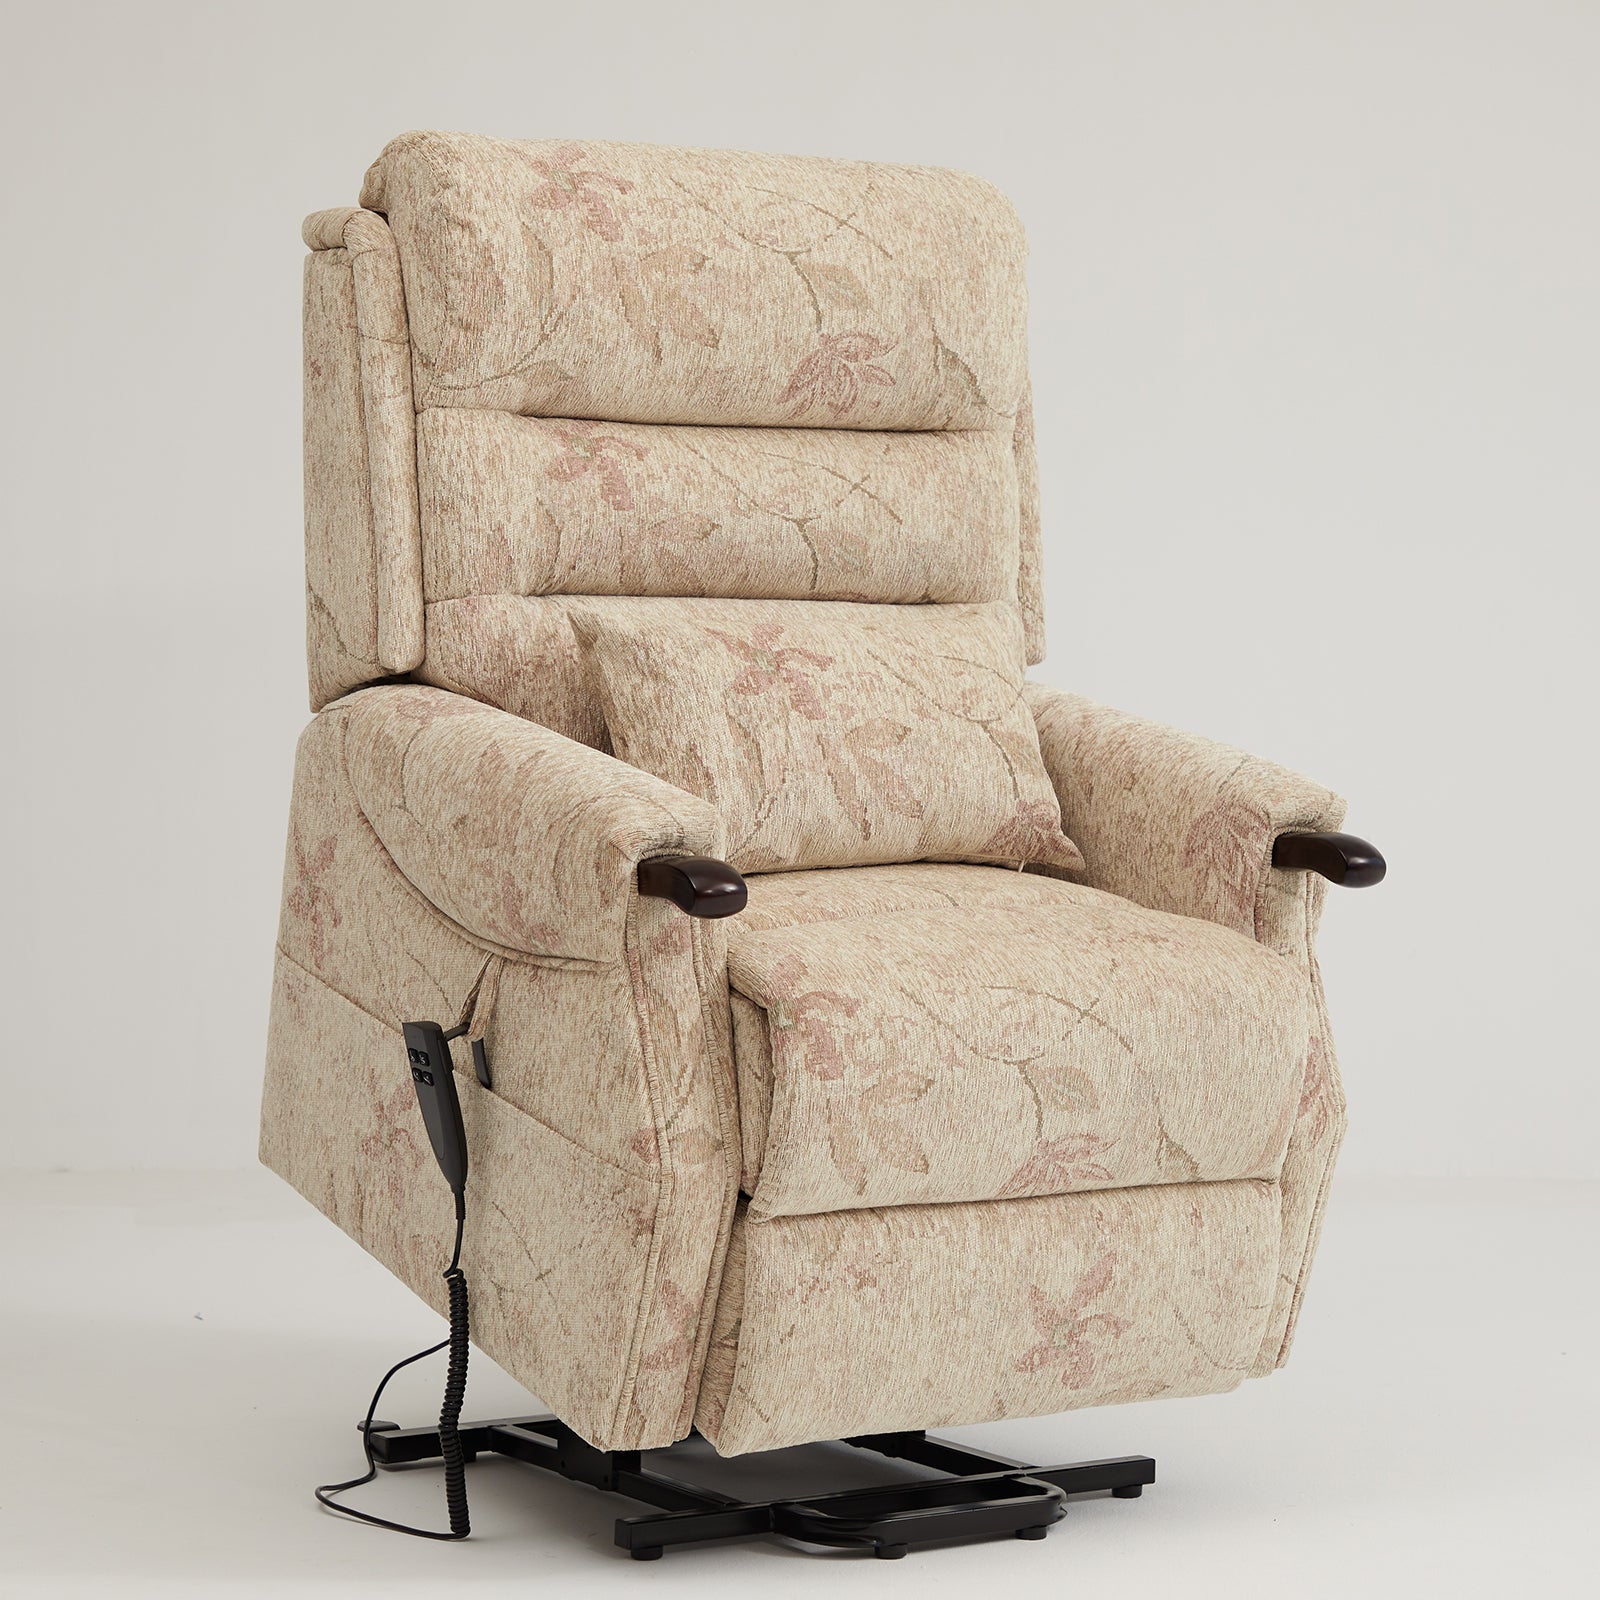 9193 Oversized Lay Flat Sleeping Chairs For The Elderly(Beige Floral)